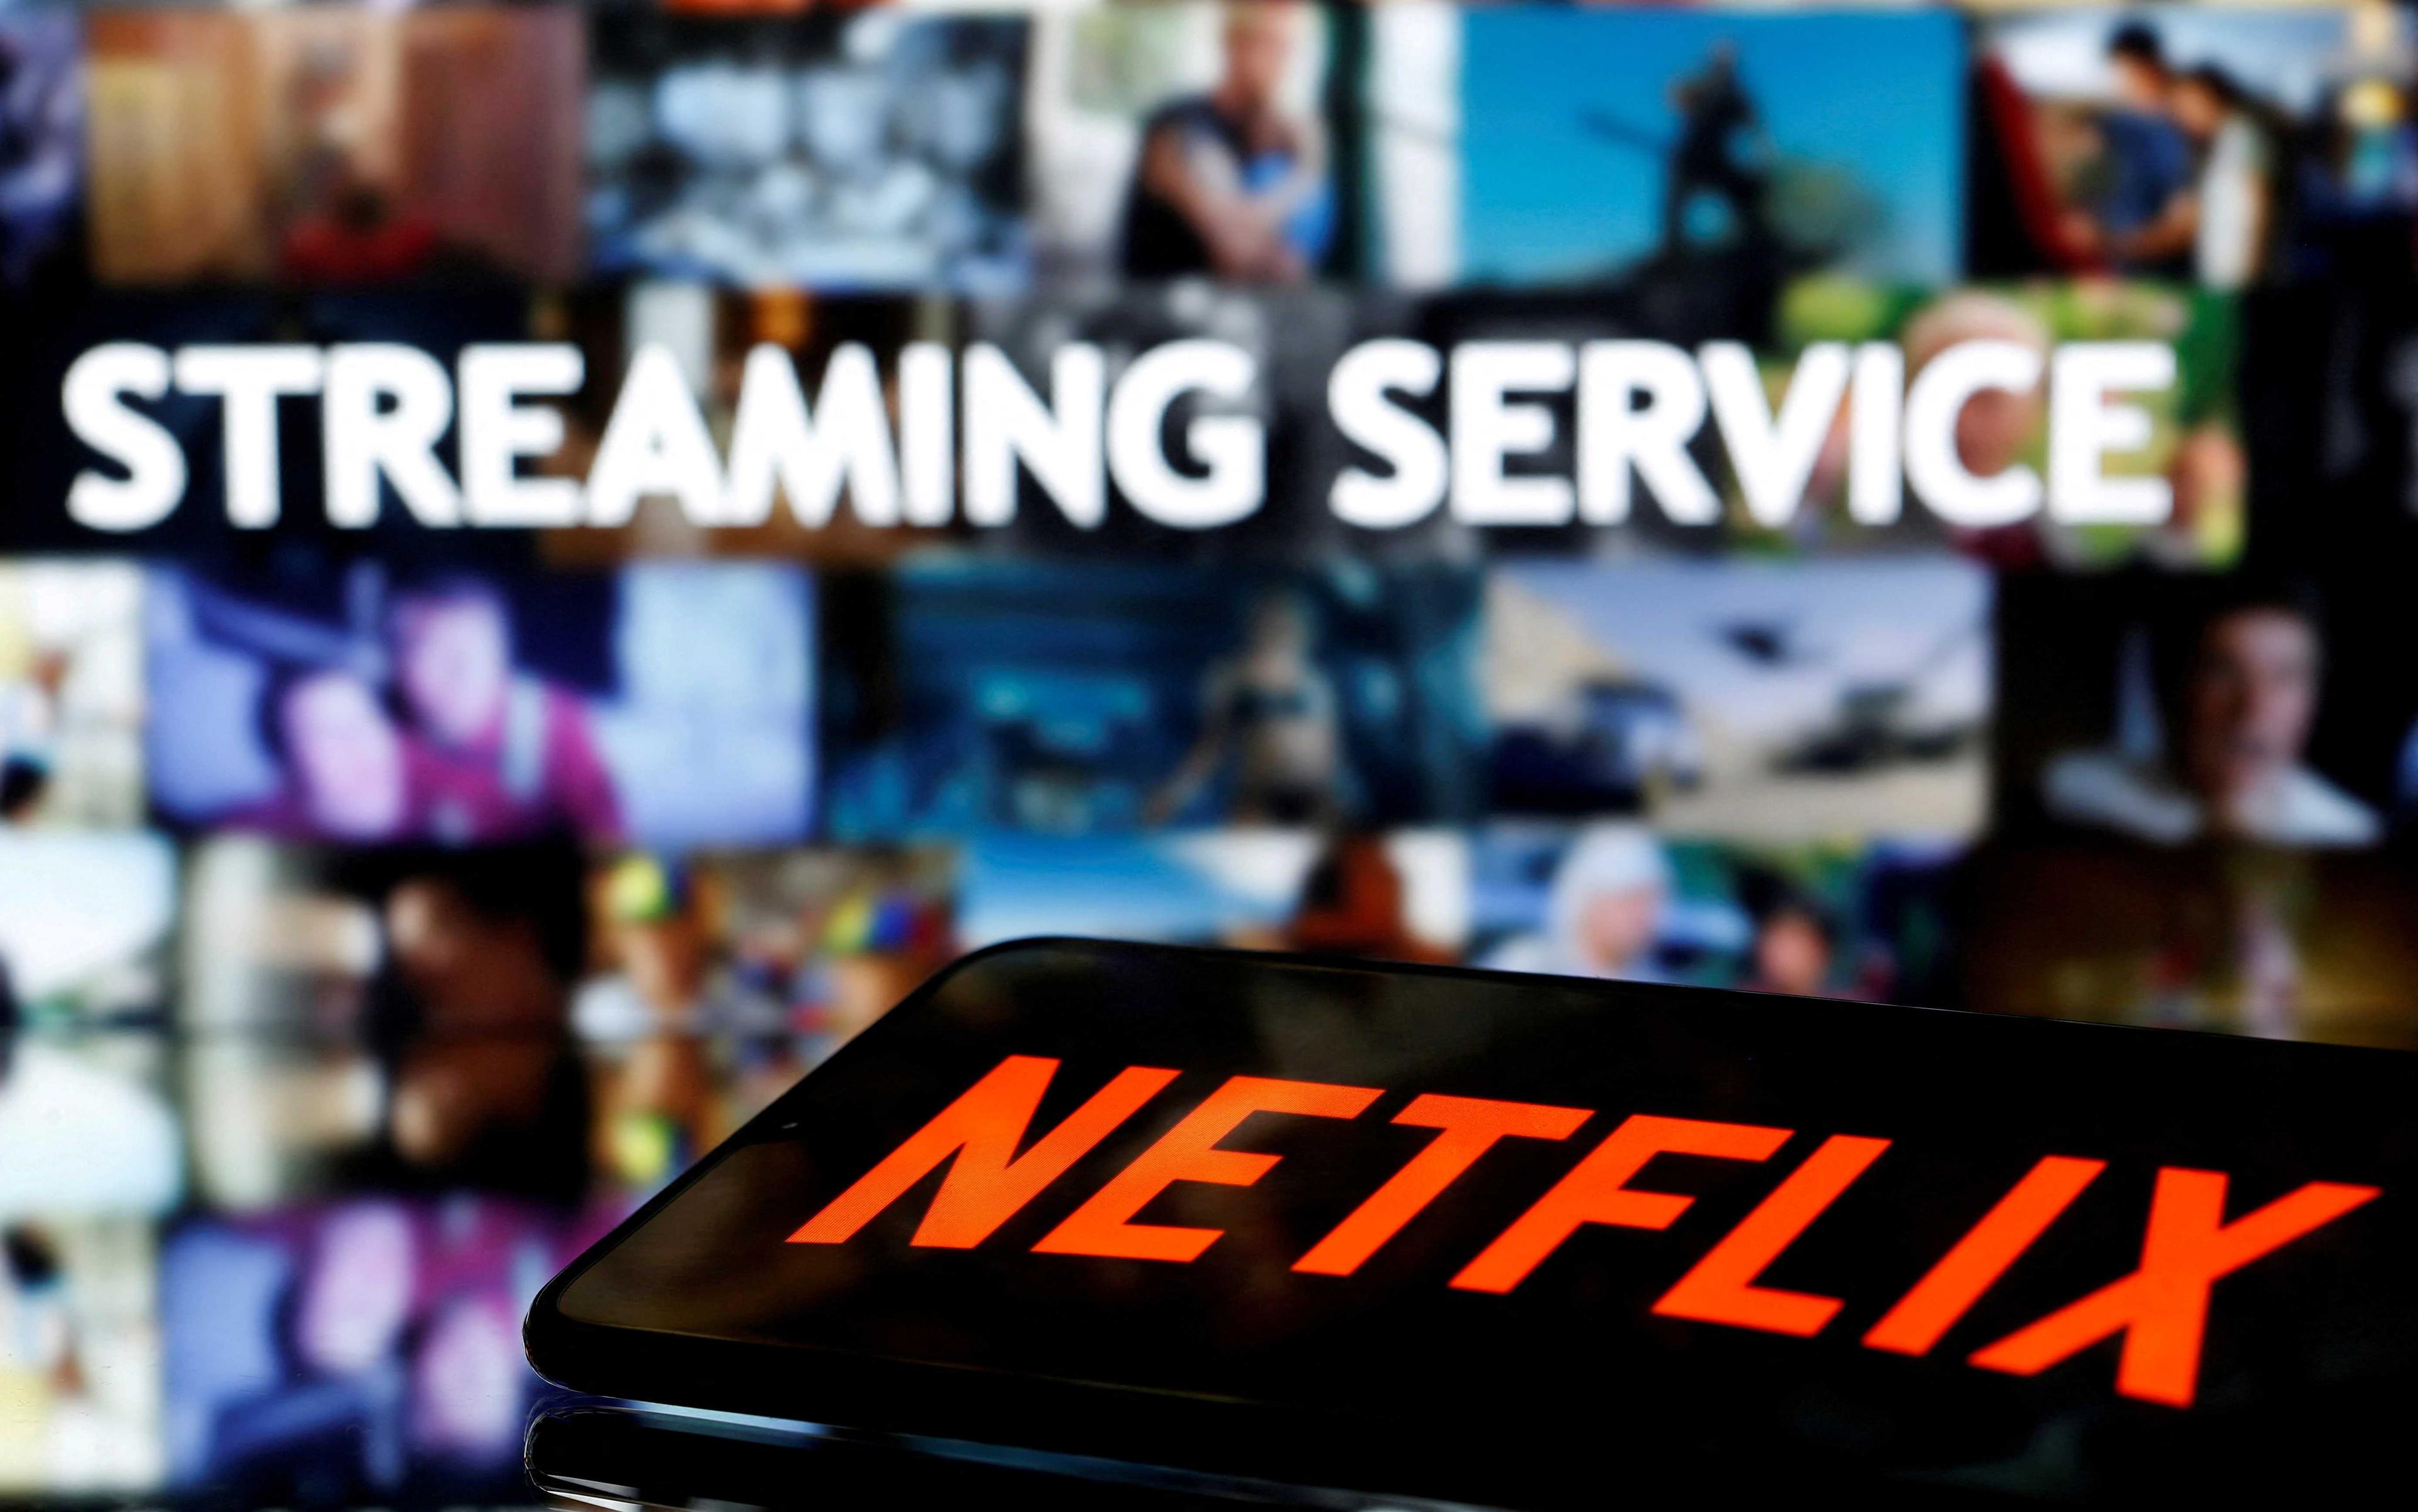 A smartphone with the Netflix logo lies in front of displayed 'Streaming service' words in this illustration taken March 24, 2020. Photo: Reuters